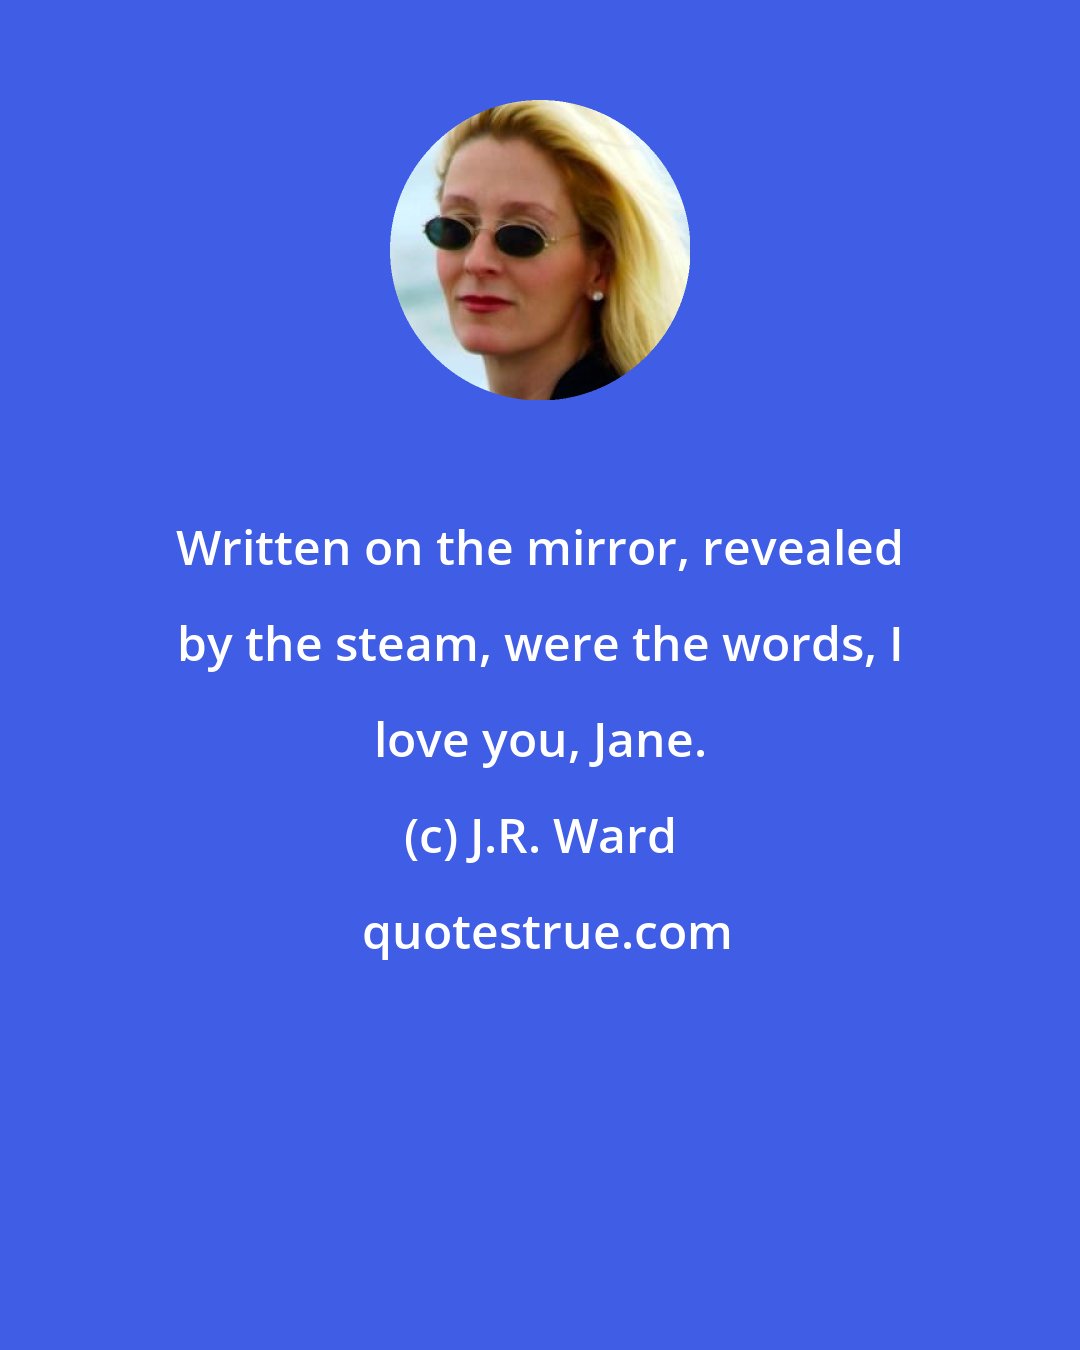 J.R. Ward: Written on the mirror, revealed by the steam, were the words, I love you, Jane.